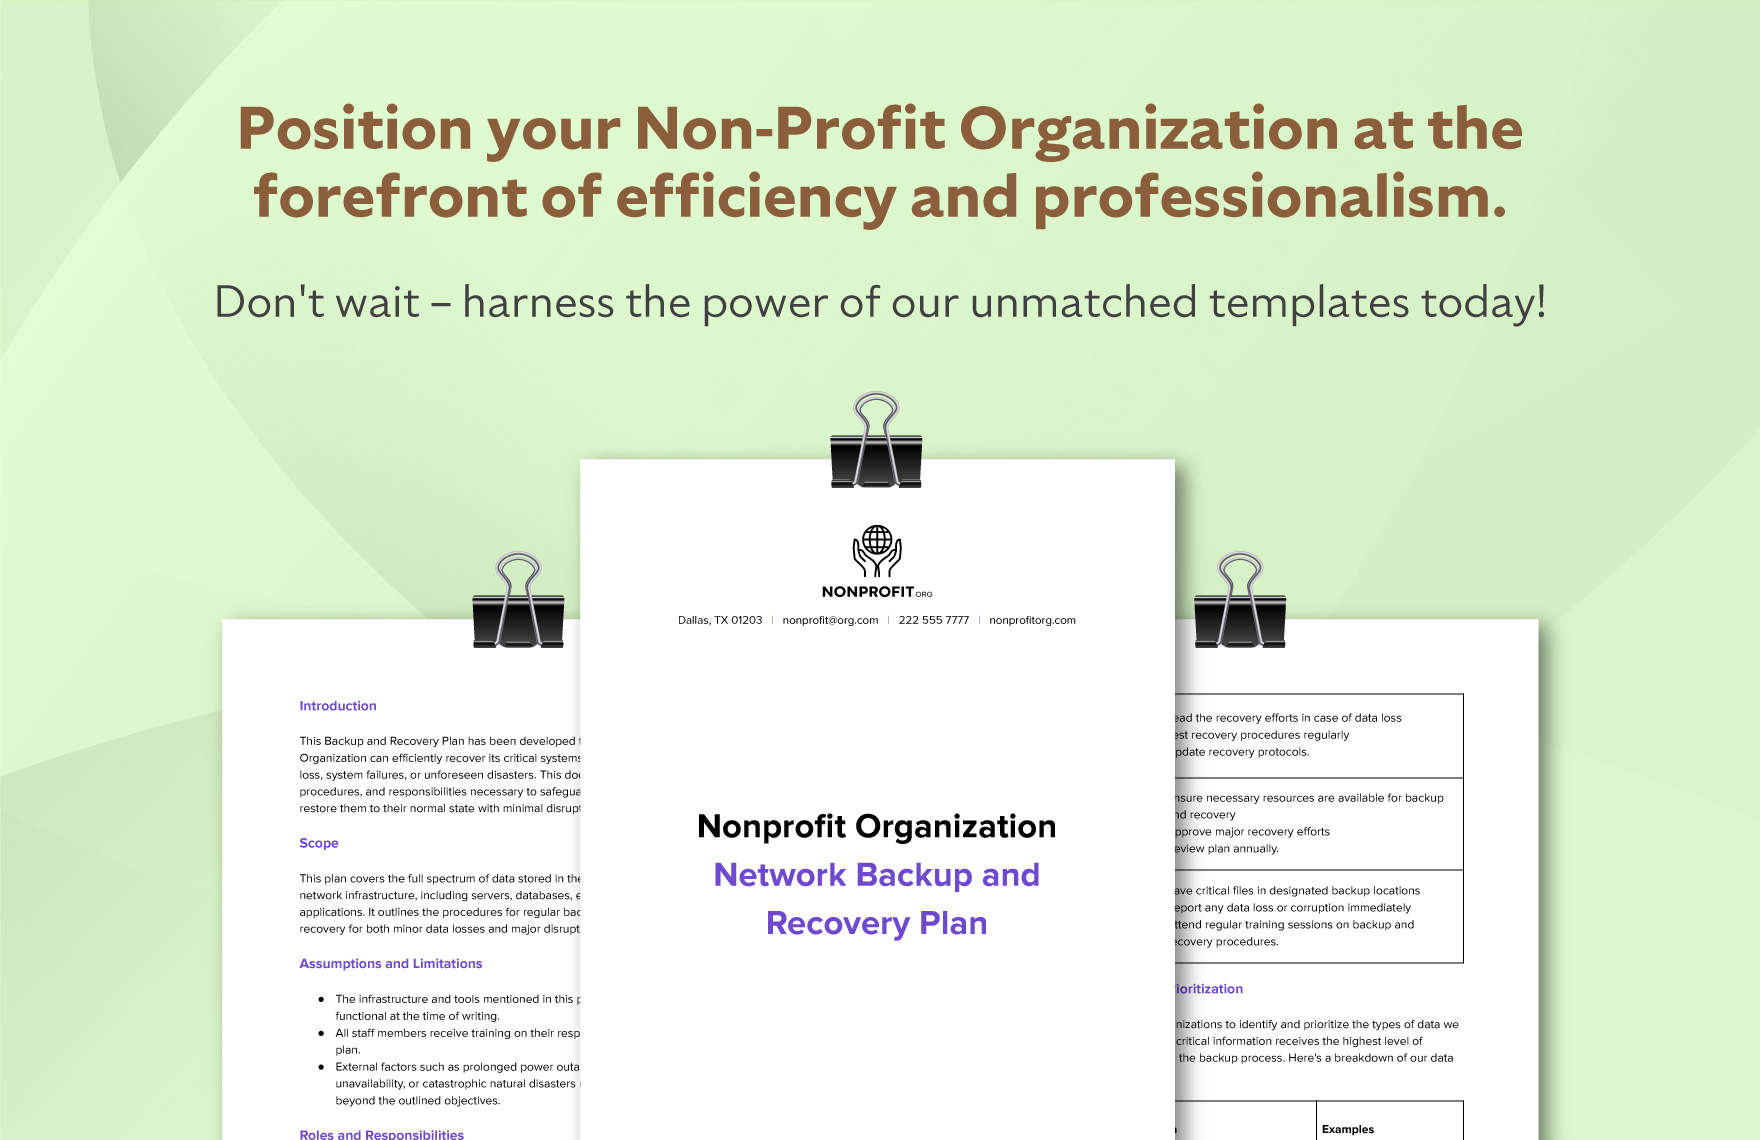 Nonprofit Organization Network Backup and Recovery Plan Template